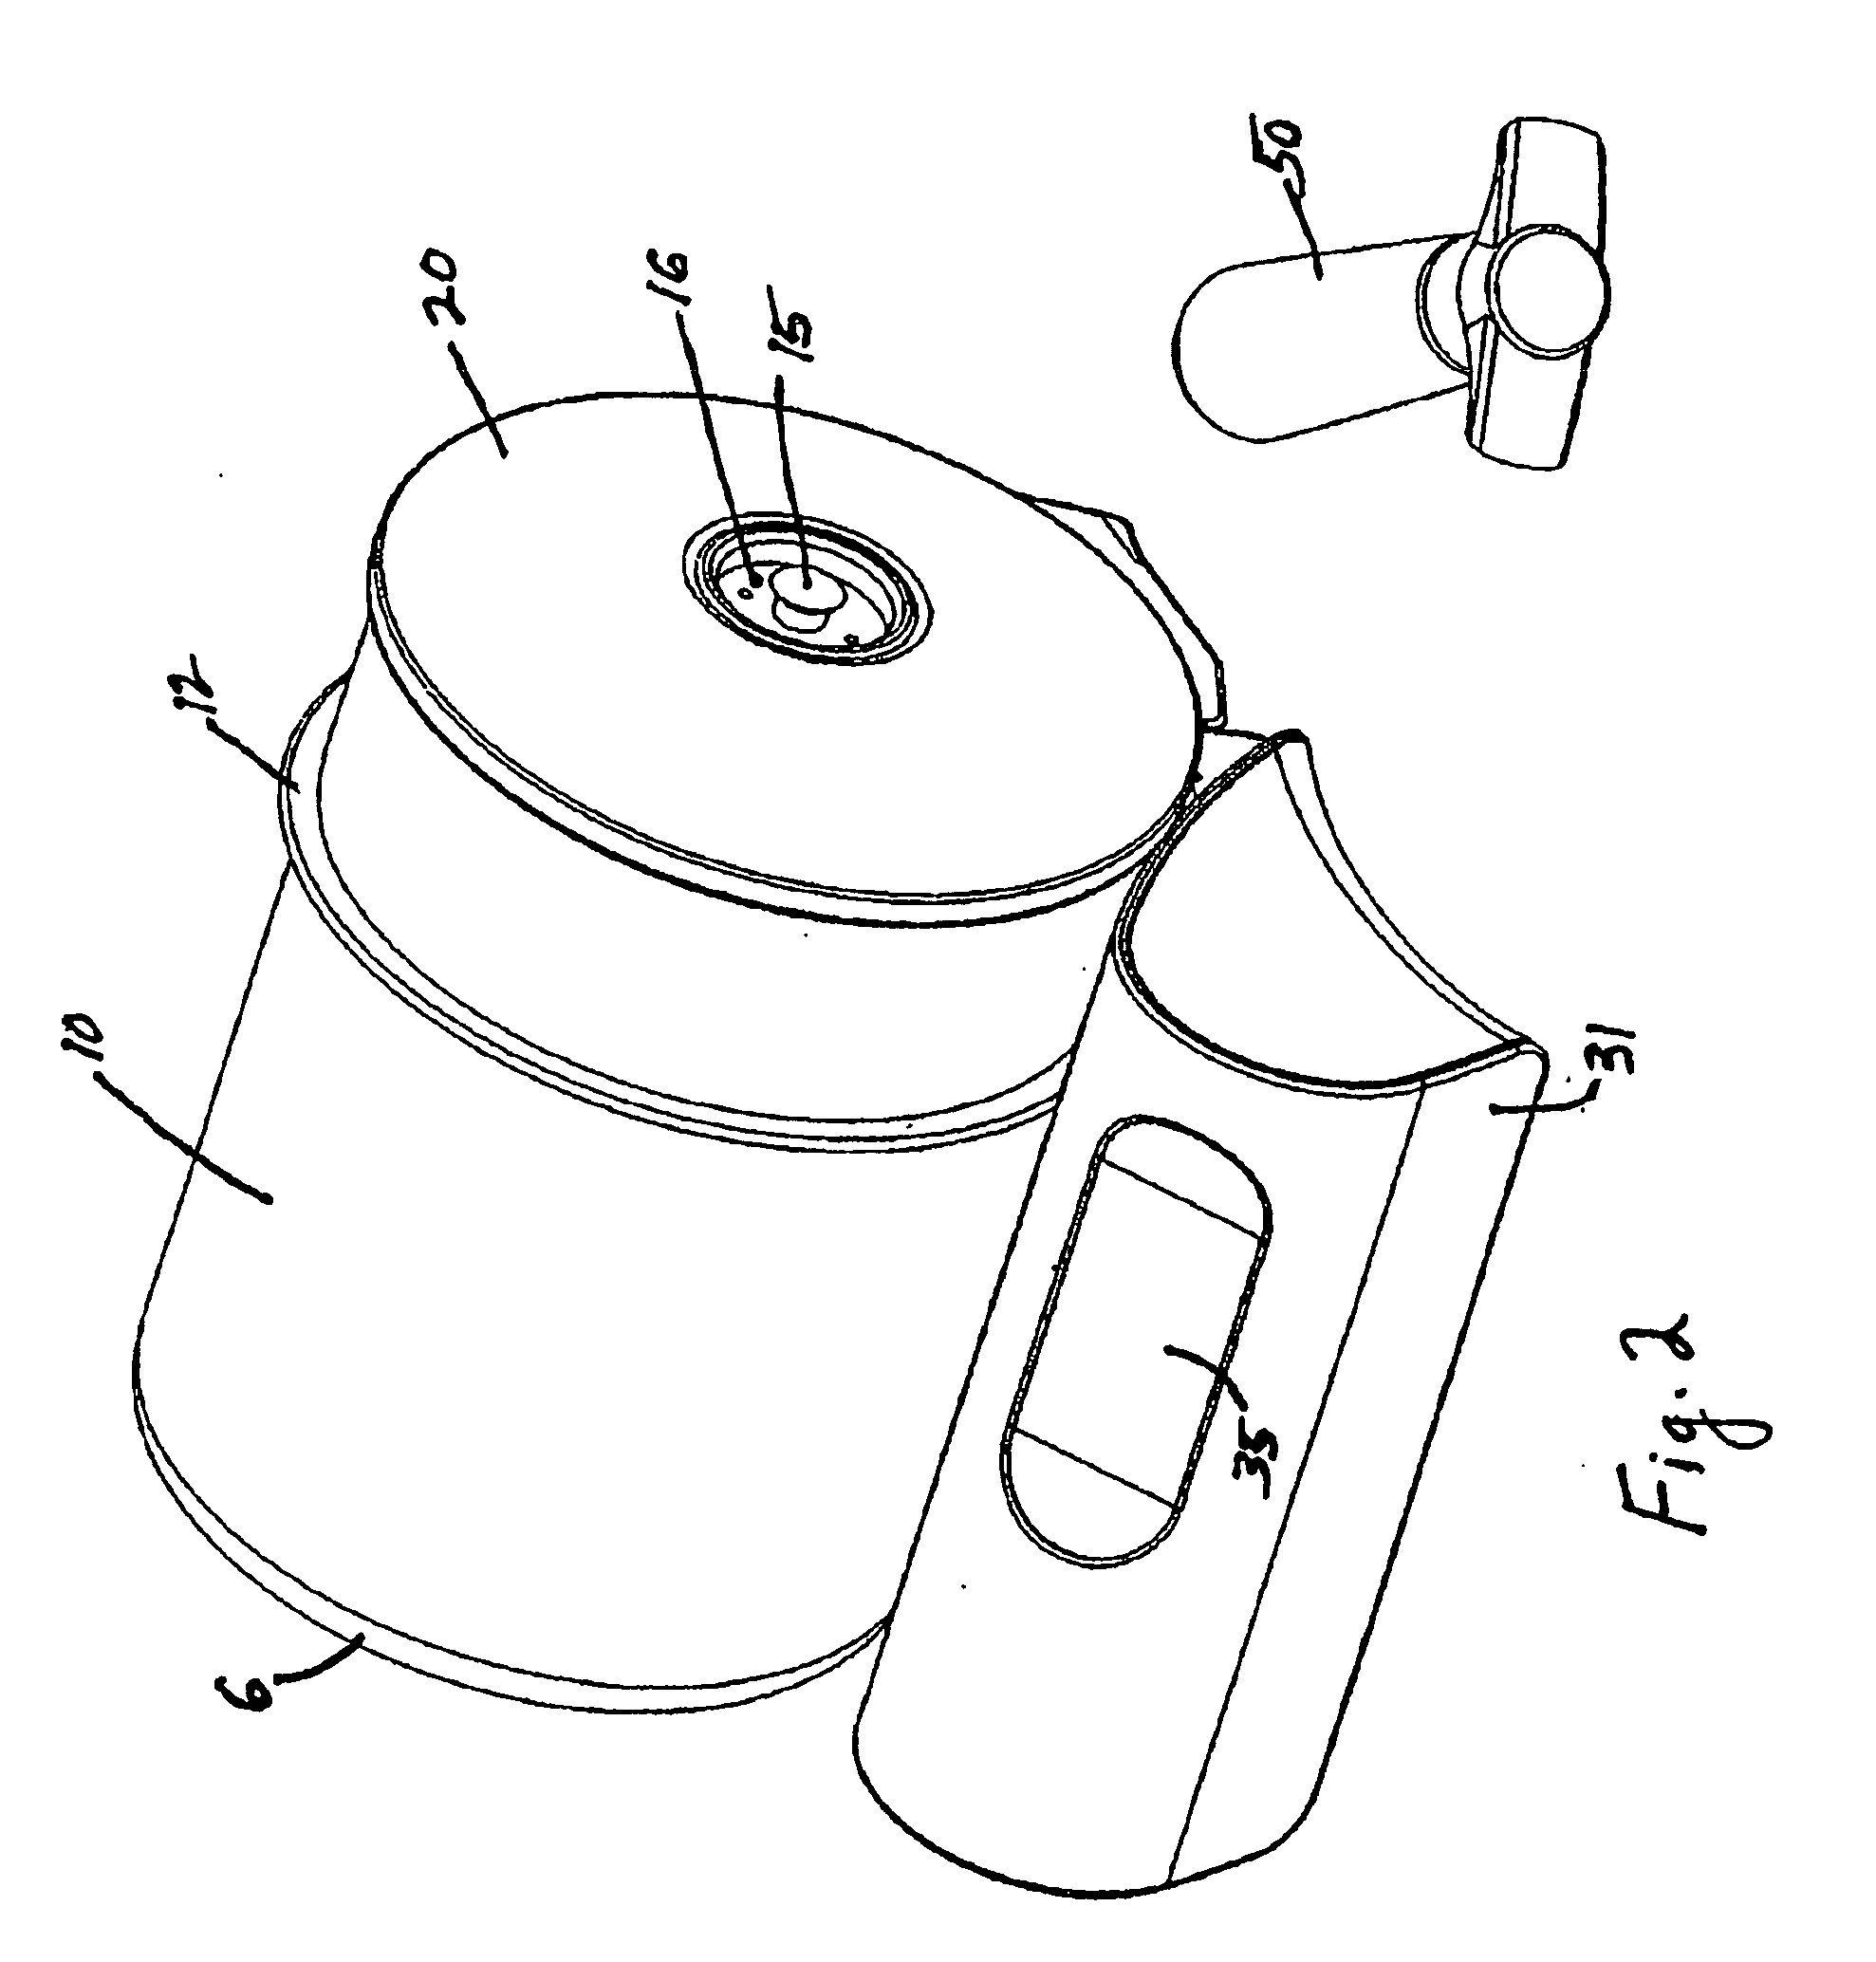 Compact apparatus for marinating and tenderizing meat